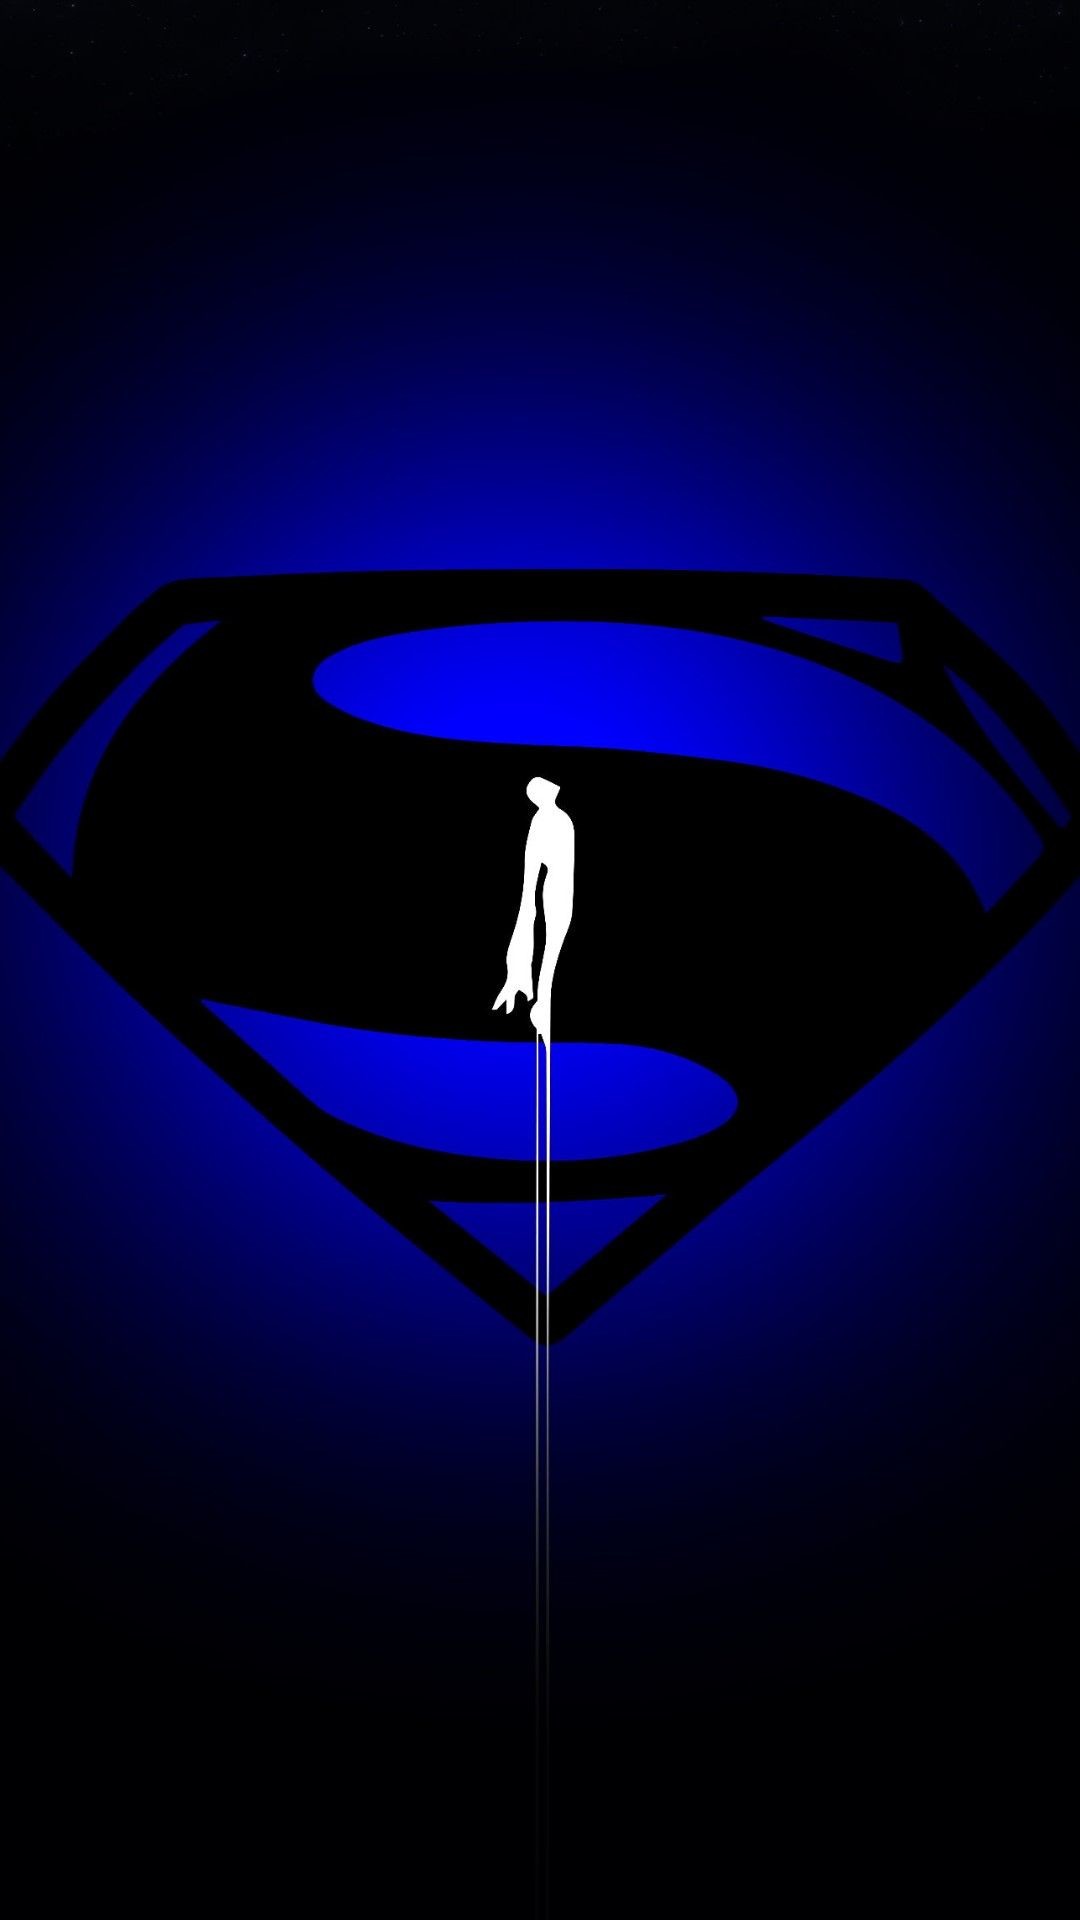 1080x1920 http://www.vactualpapers.com/gallery/blue-superman-